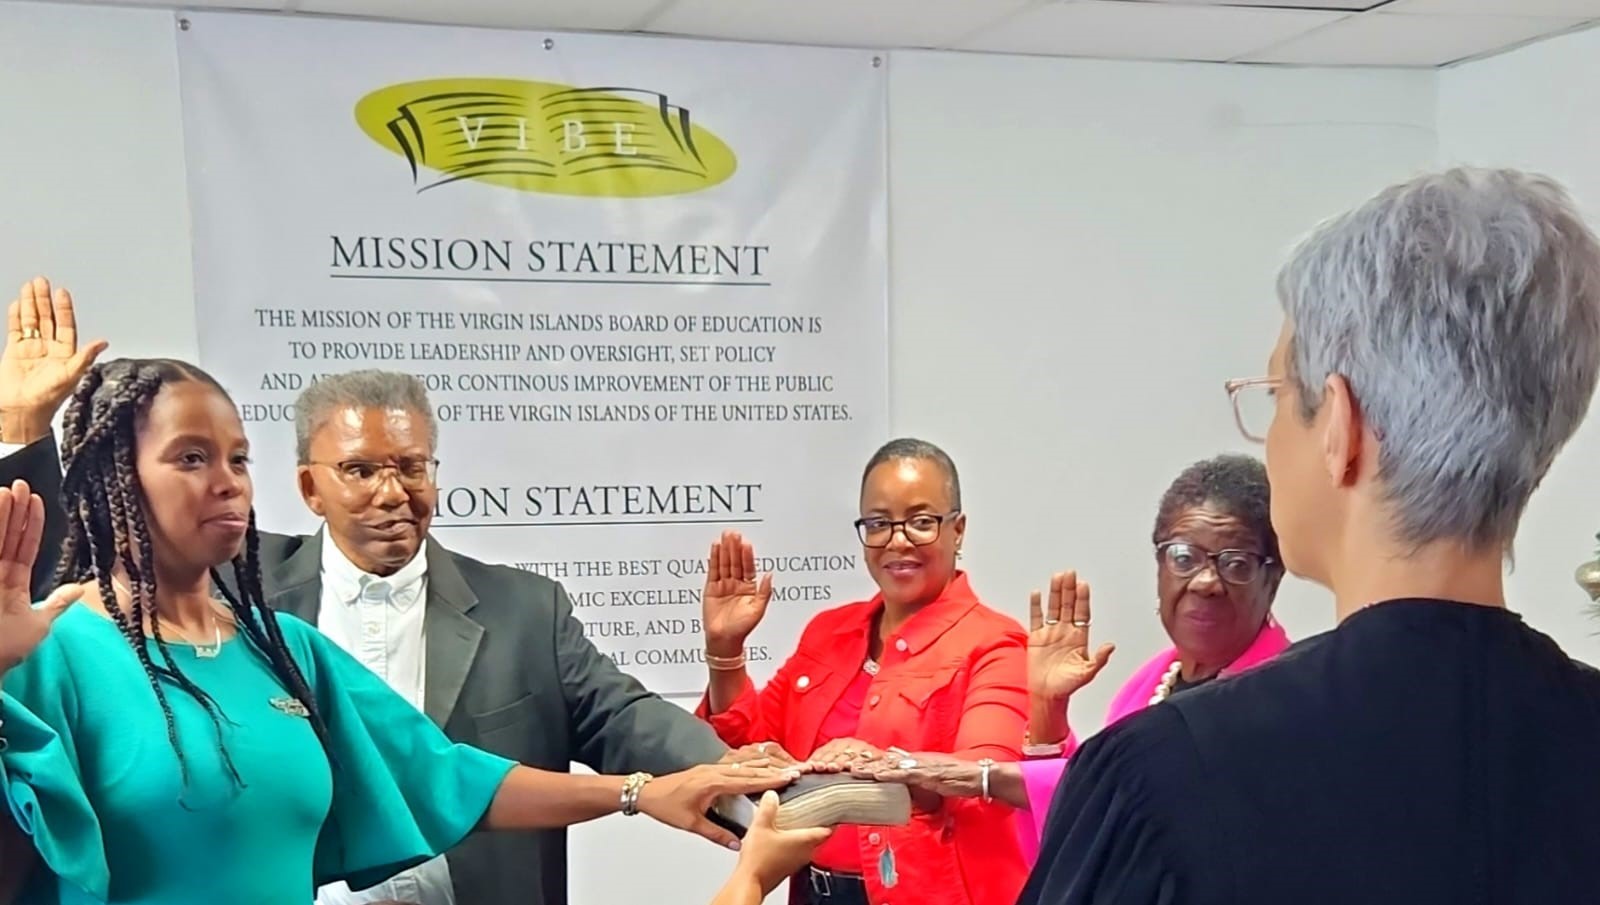 Superior Court Magistrate Judge Jessica Gallivan administered the oath of office for the St. Croix district members: Winona A. Hendricks, Terrence T. Joseph, Emmanuella Perez-Cassius, and Shawna K. Richards. (Photo courtesy Board of Education)